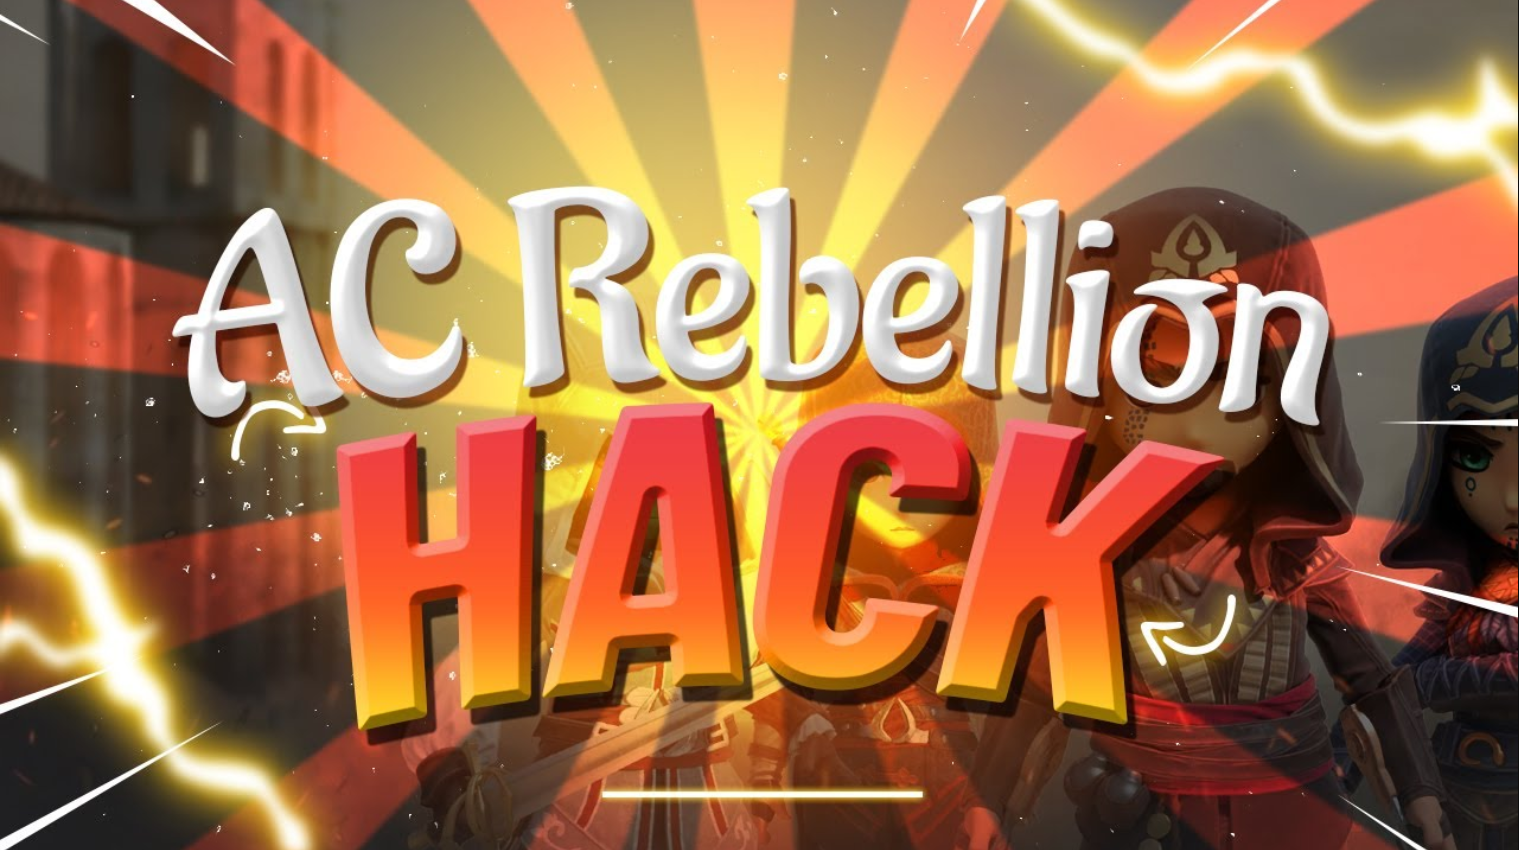 Assassin's Creed Rebellion Hack on iPhone for Free